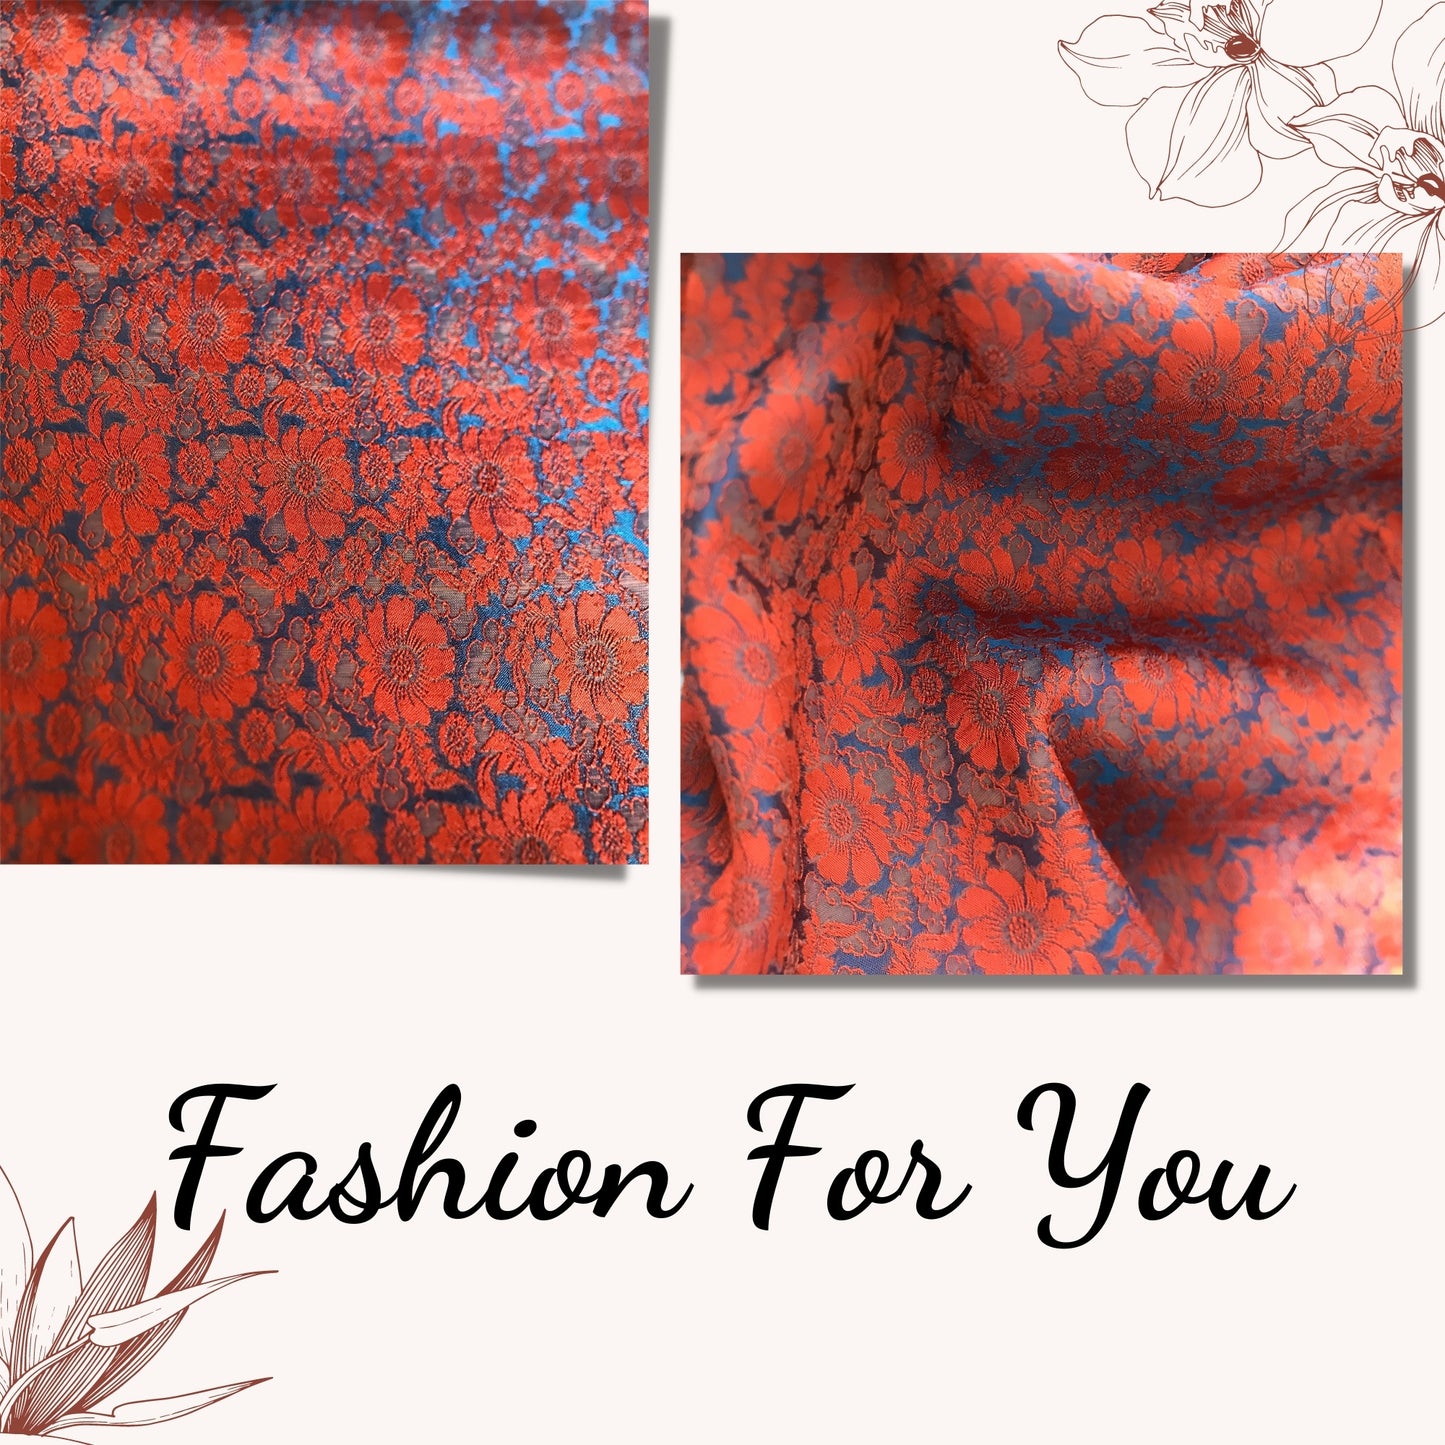 Mulberry Silk Floral Fabric – Chrysanthemum Pattern – Silk for Sewing - Dress making - Orange and blue silk fabric